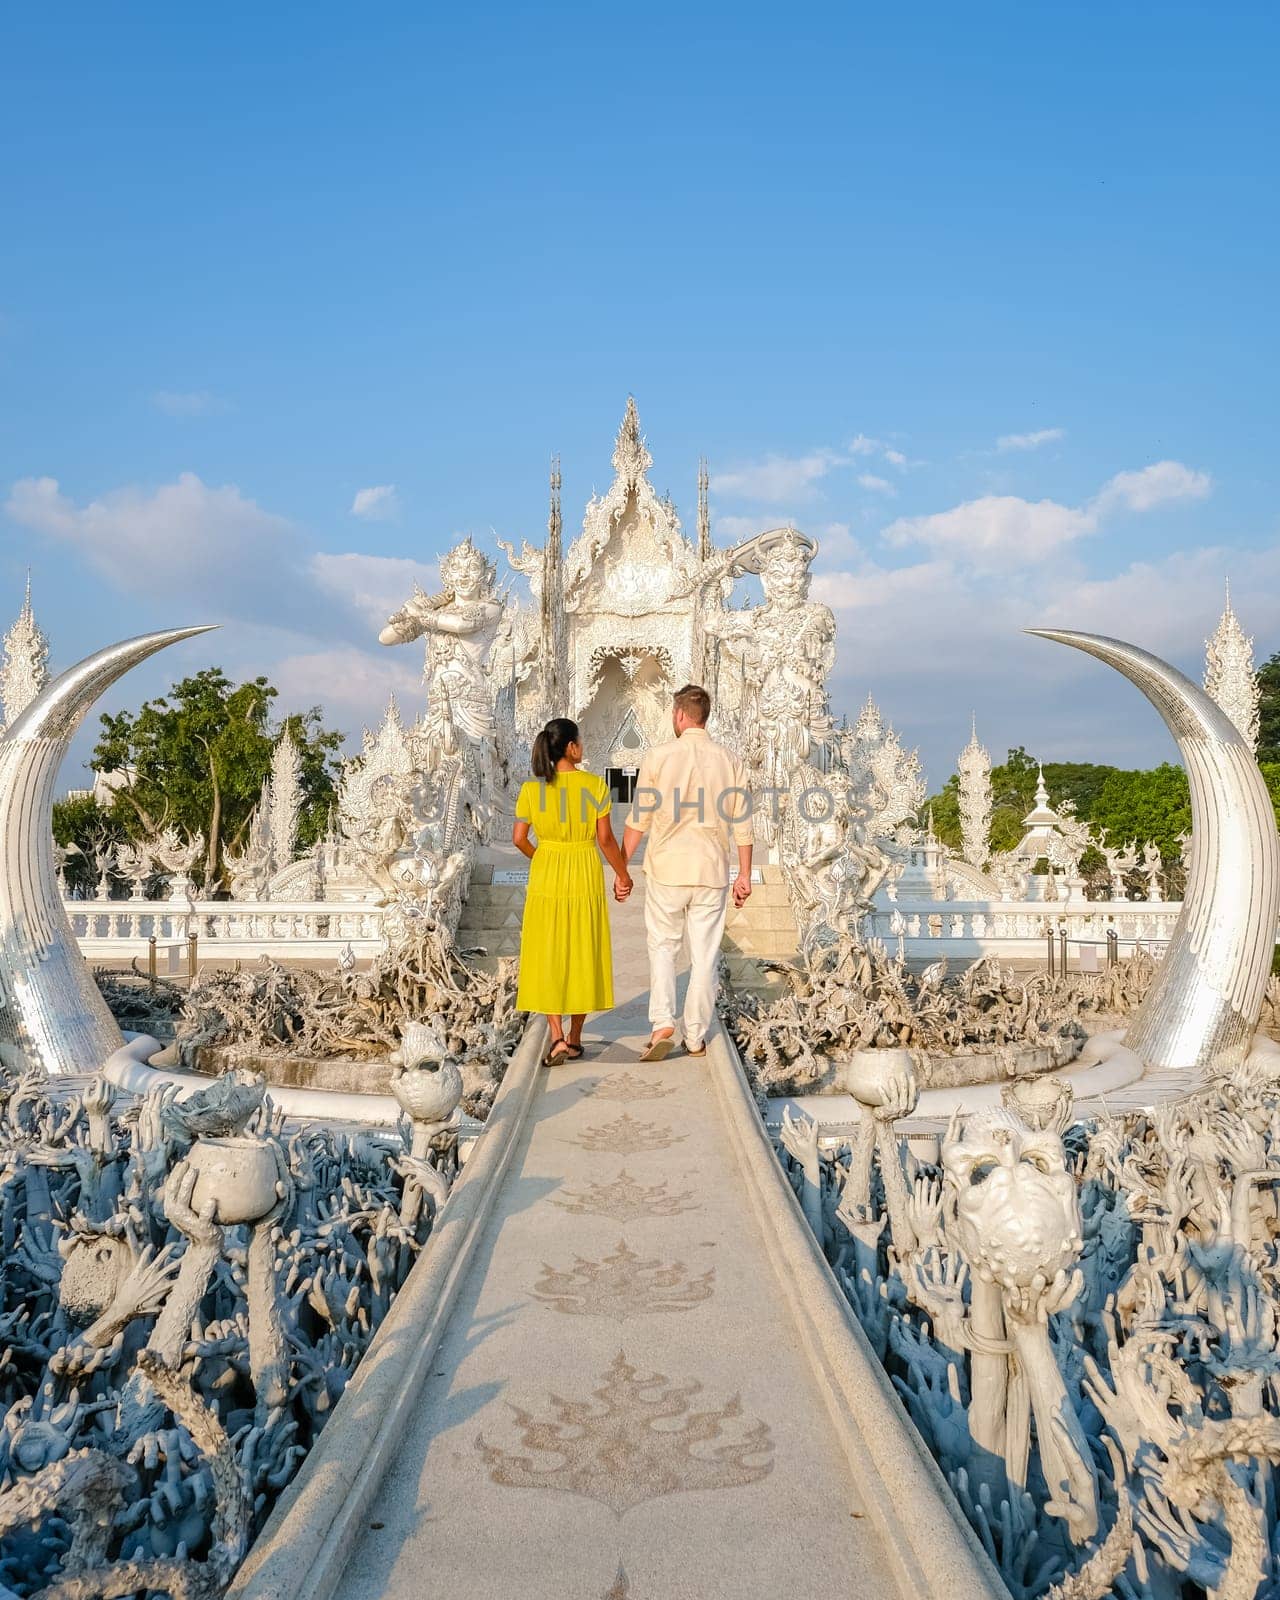 White Temple Chiang Rai Thailand,a couple of men and women visit Wat Rong Khun temple, Northern Thailand.